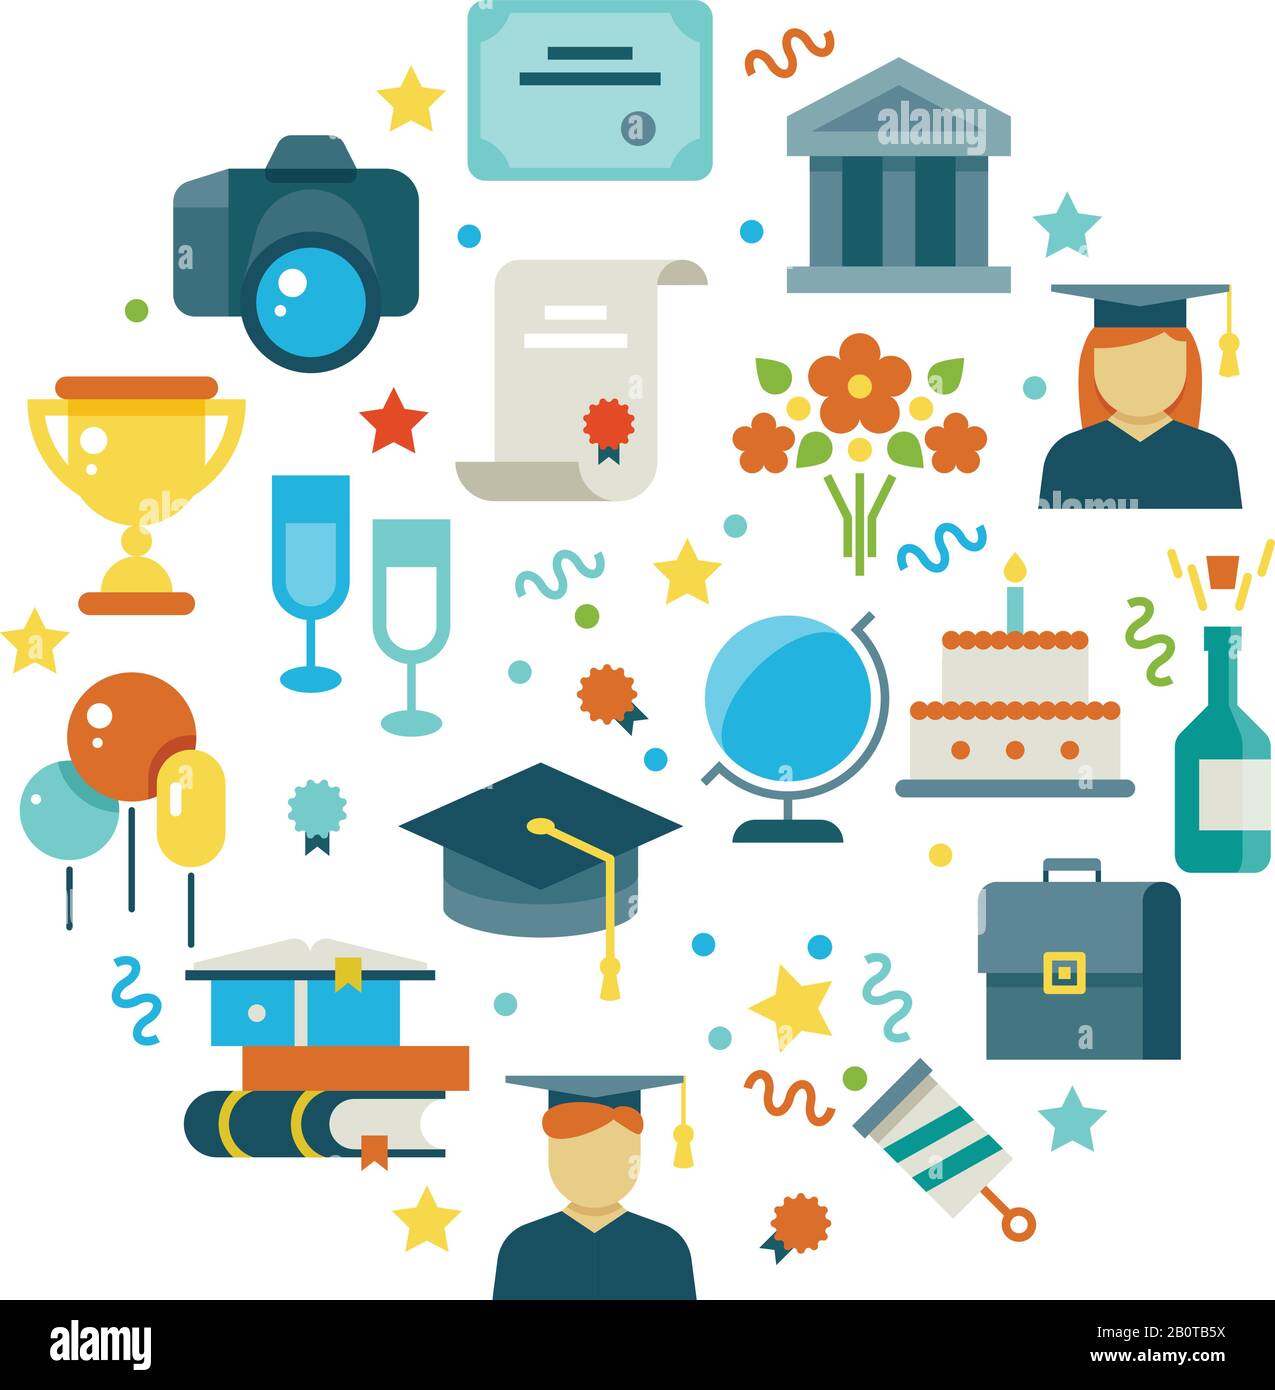 Graduation day and learning vector concept with graduate party icons. Graduation university and illustration of graduation college Stock Vector